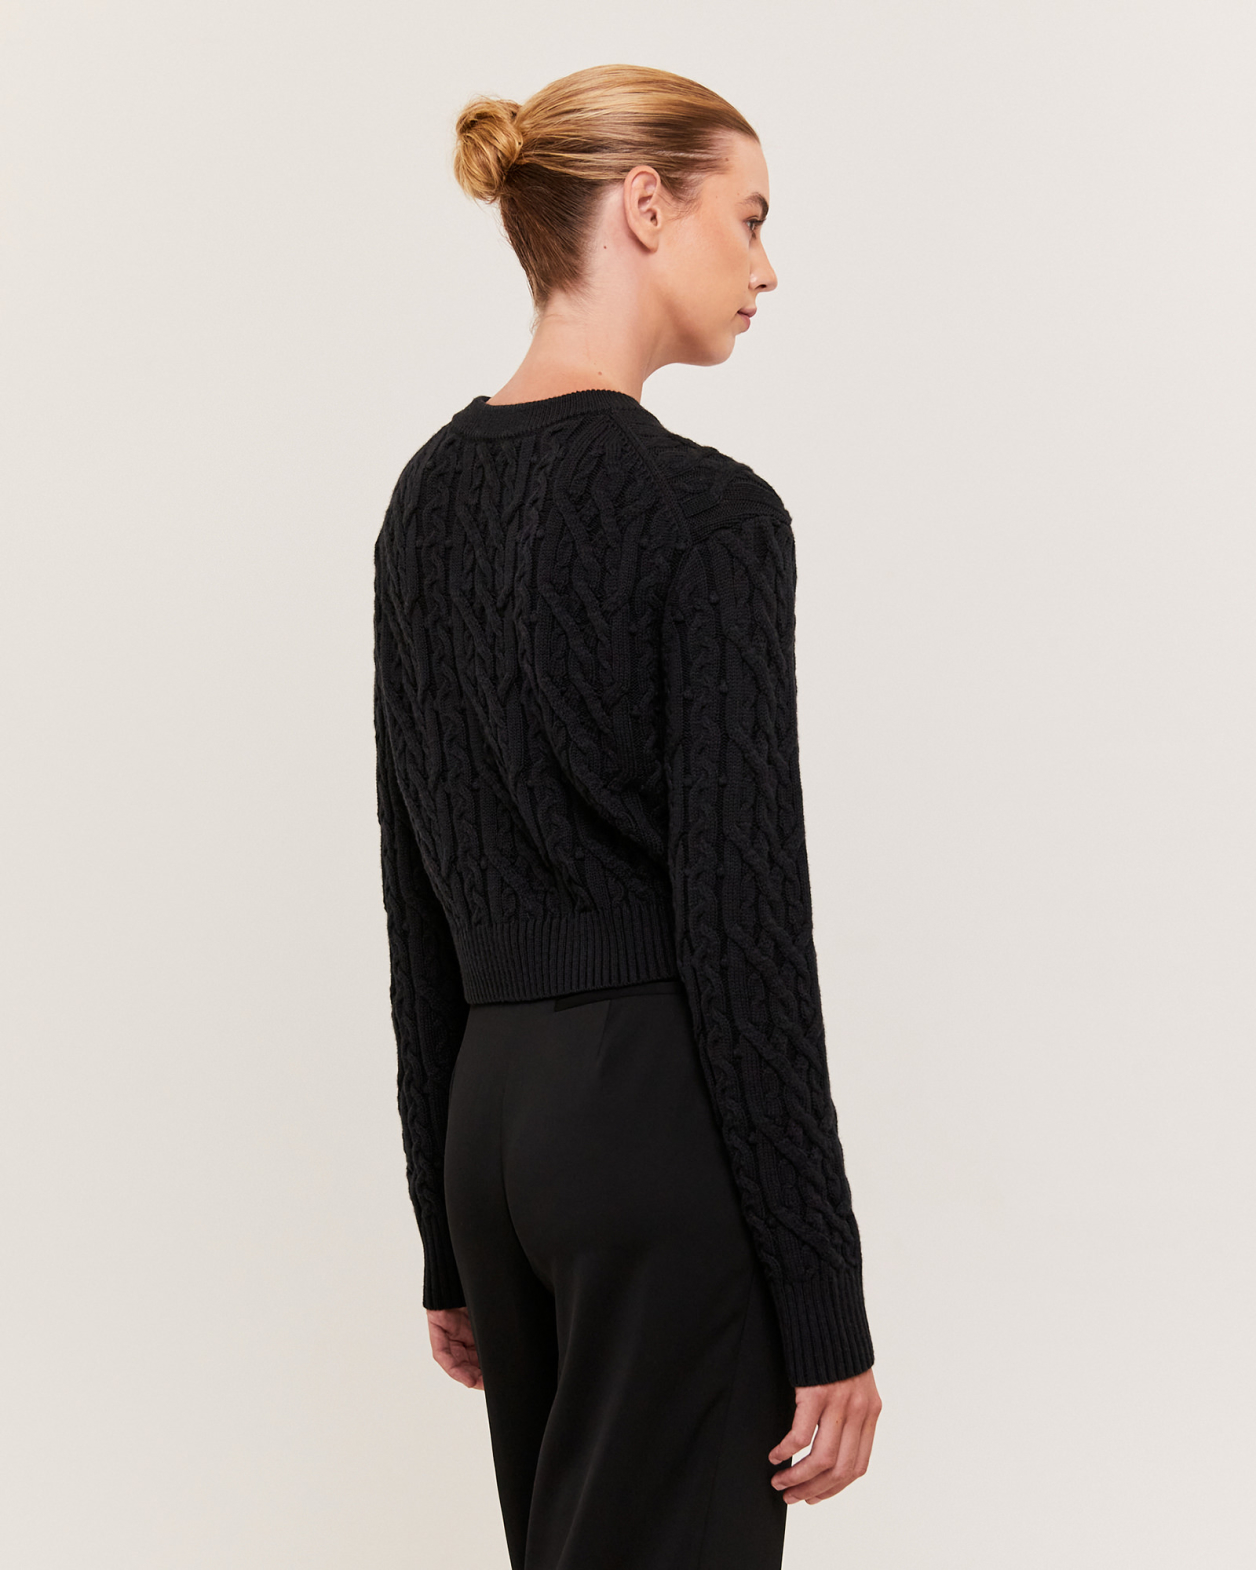 Ariana Cable Crop Cardigan in BLACK